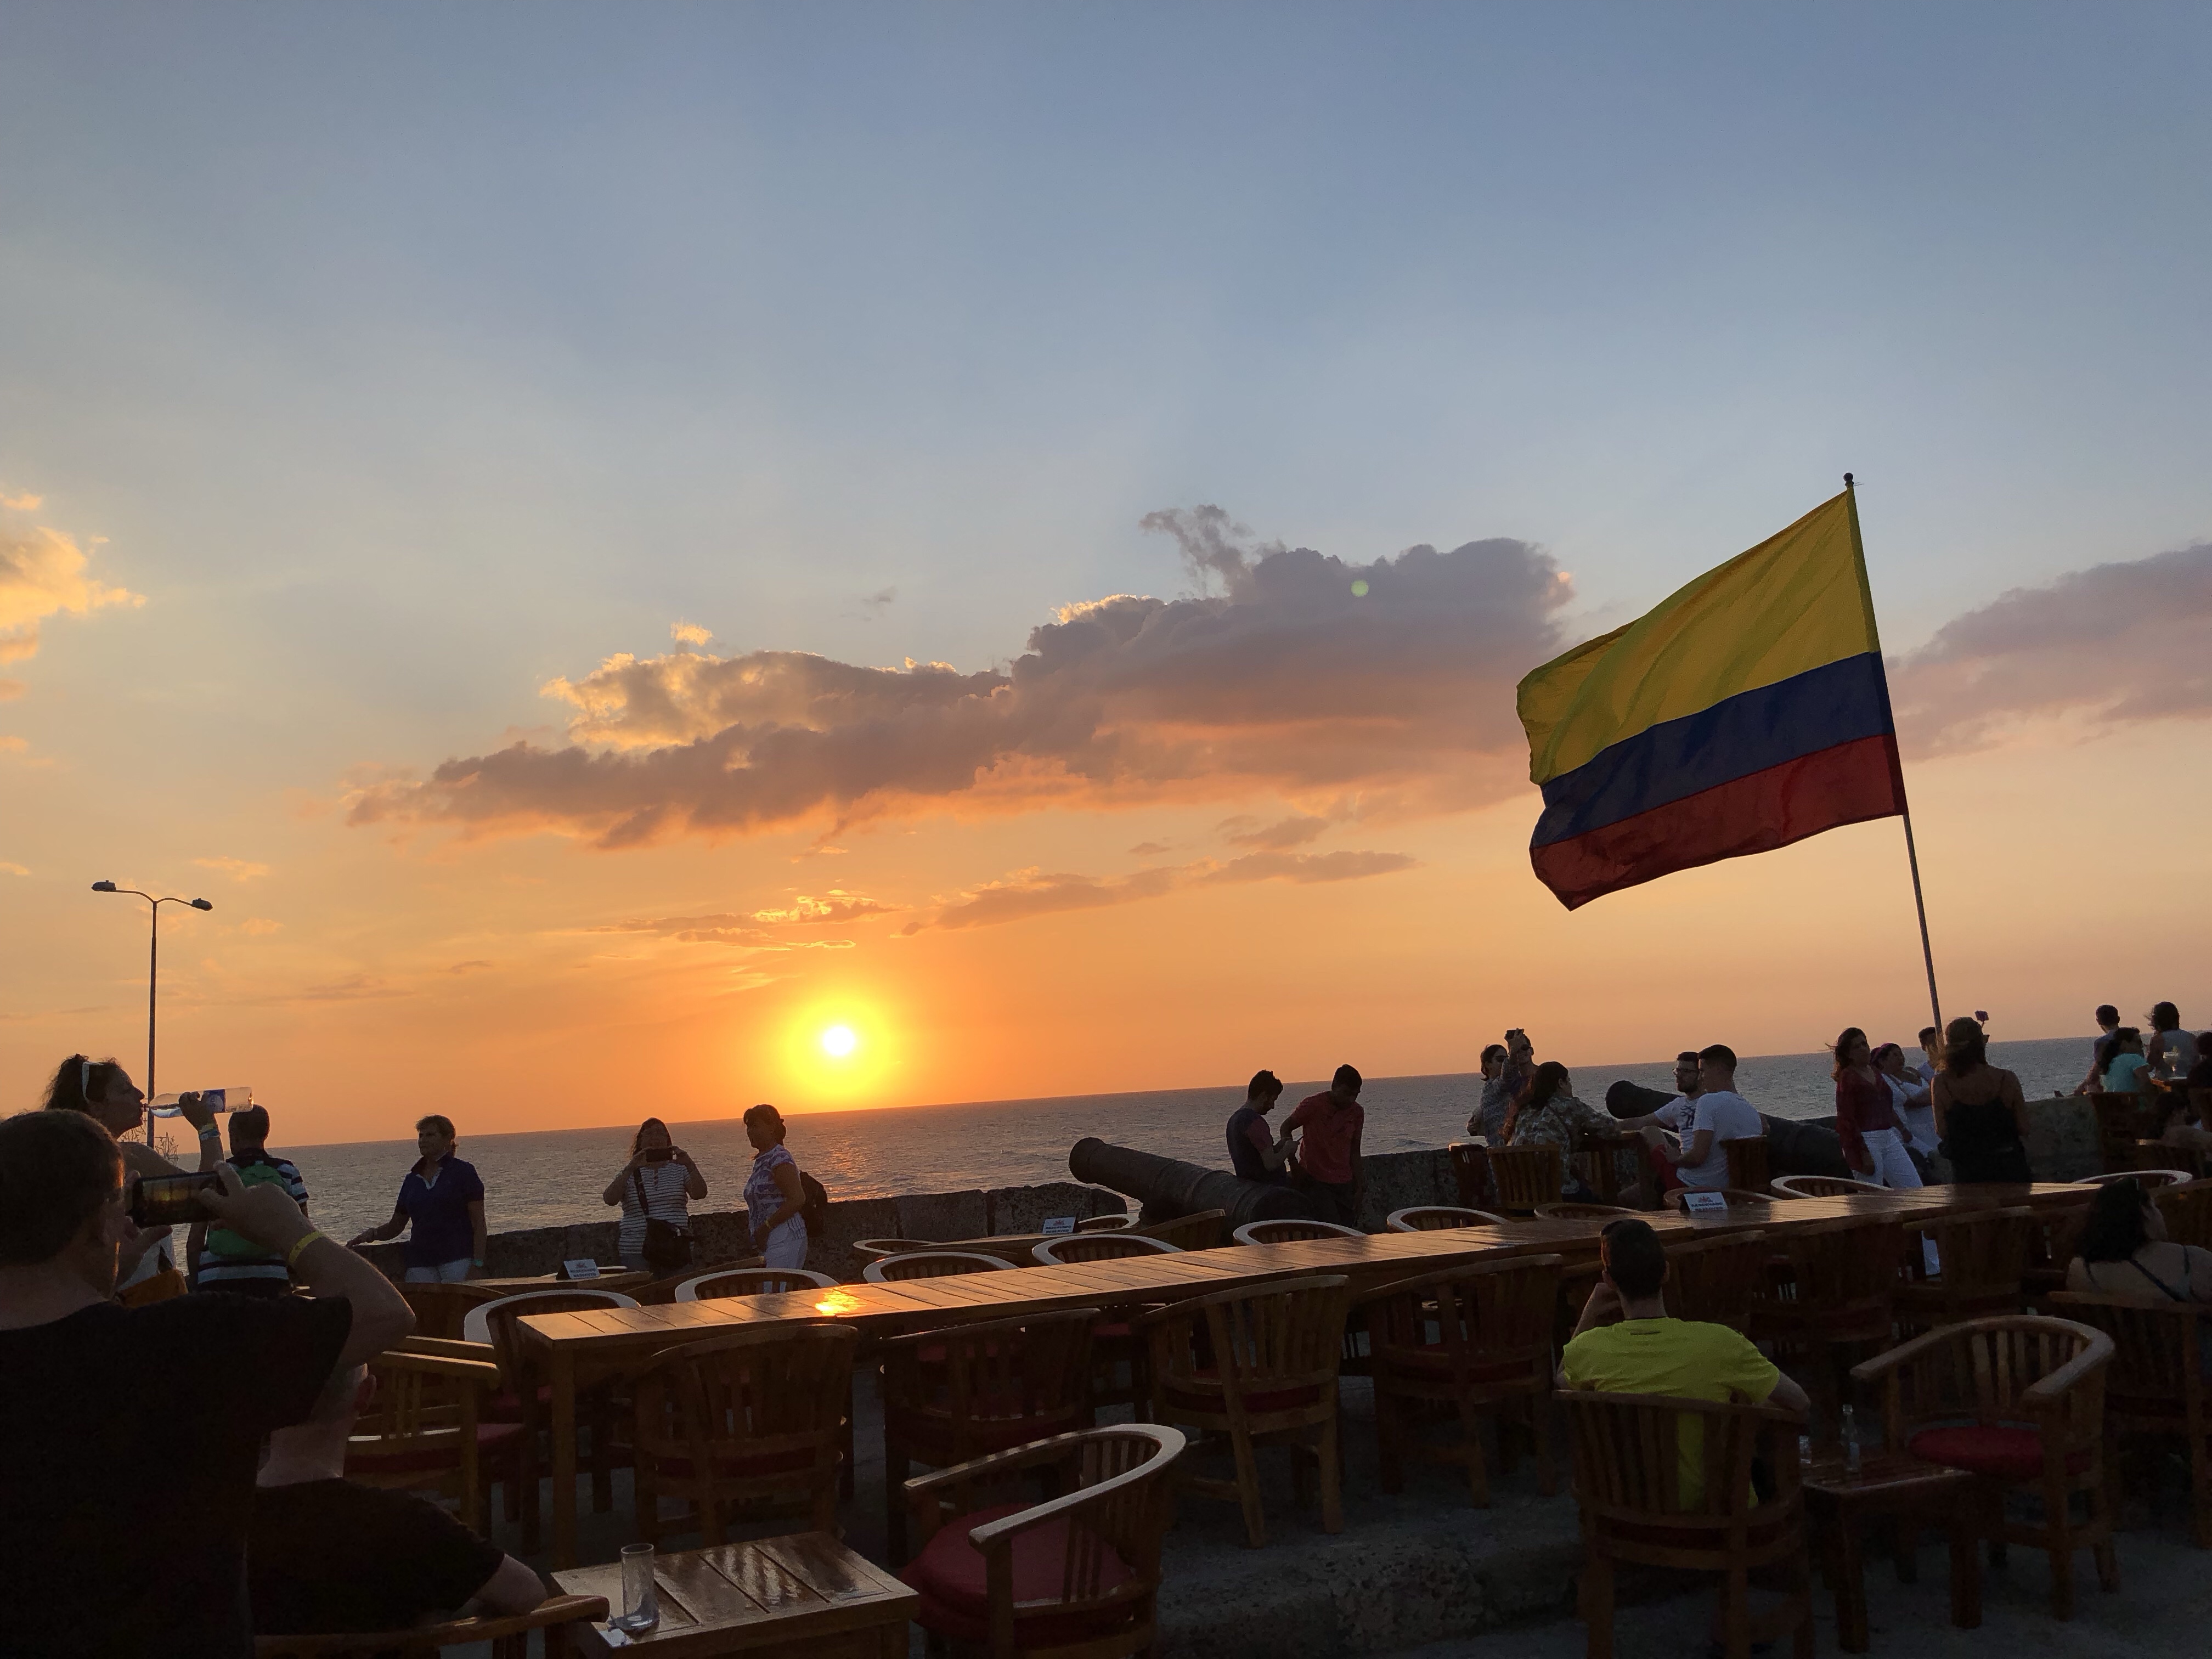 THE WALLED CITY OF CARTAGENA-WHERE TO EAT,SLEEP AND EXPLORE